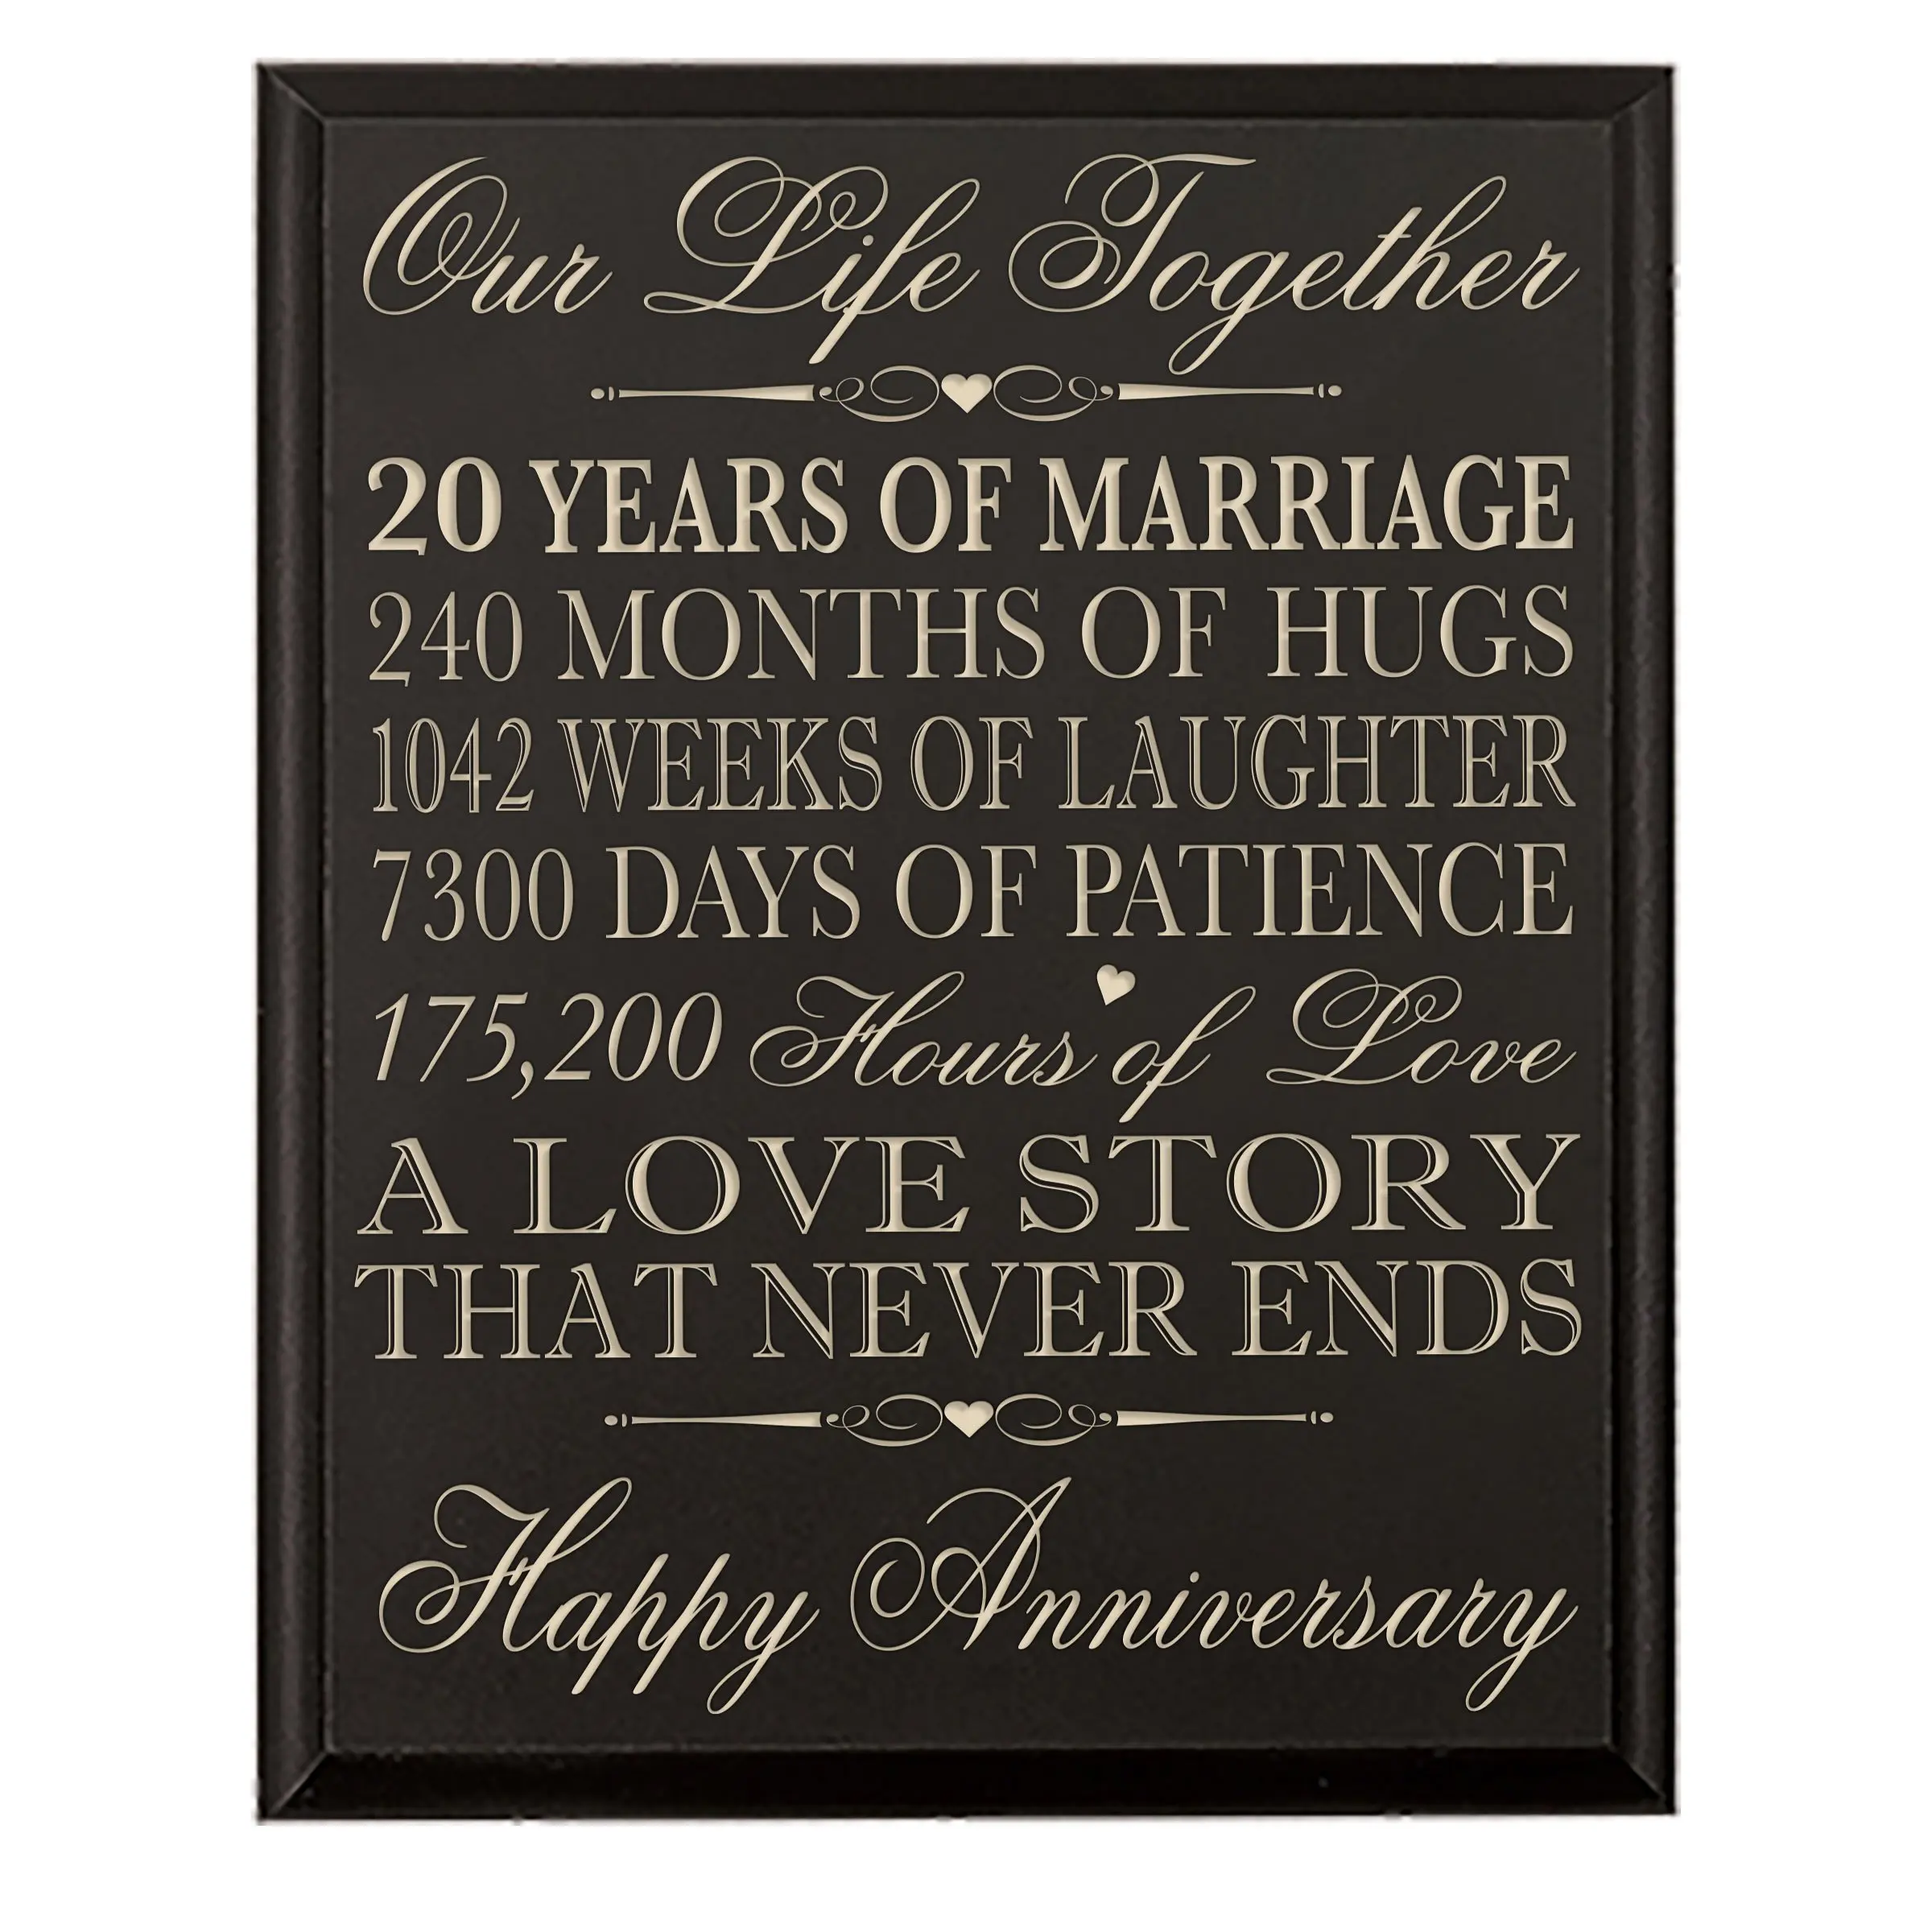 20th Wedding Anniversary Gifts For Couples
 Buy 20th Wedding Anniversary Wall Plaque Gifts for Couple